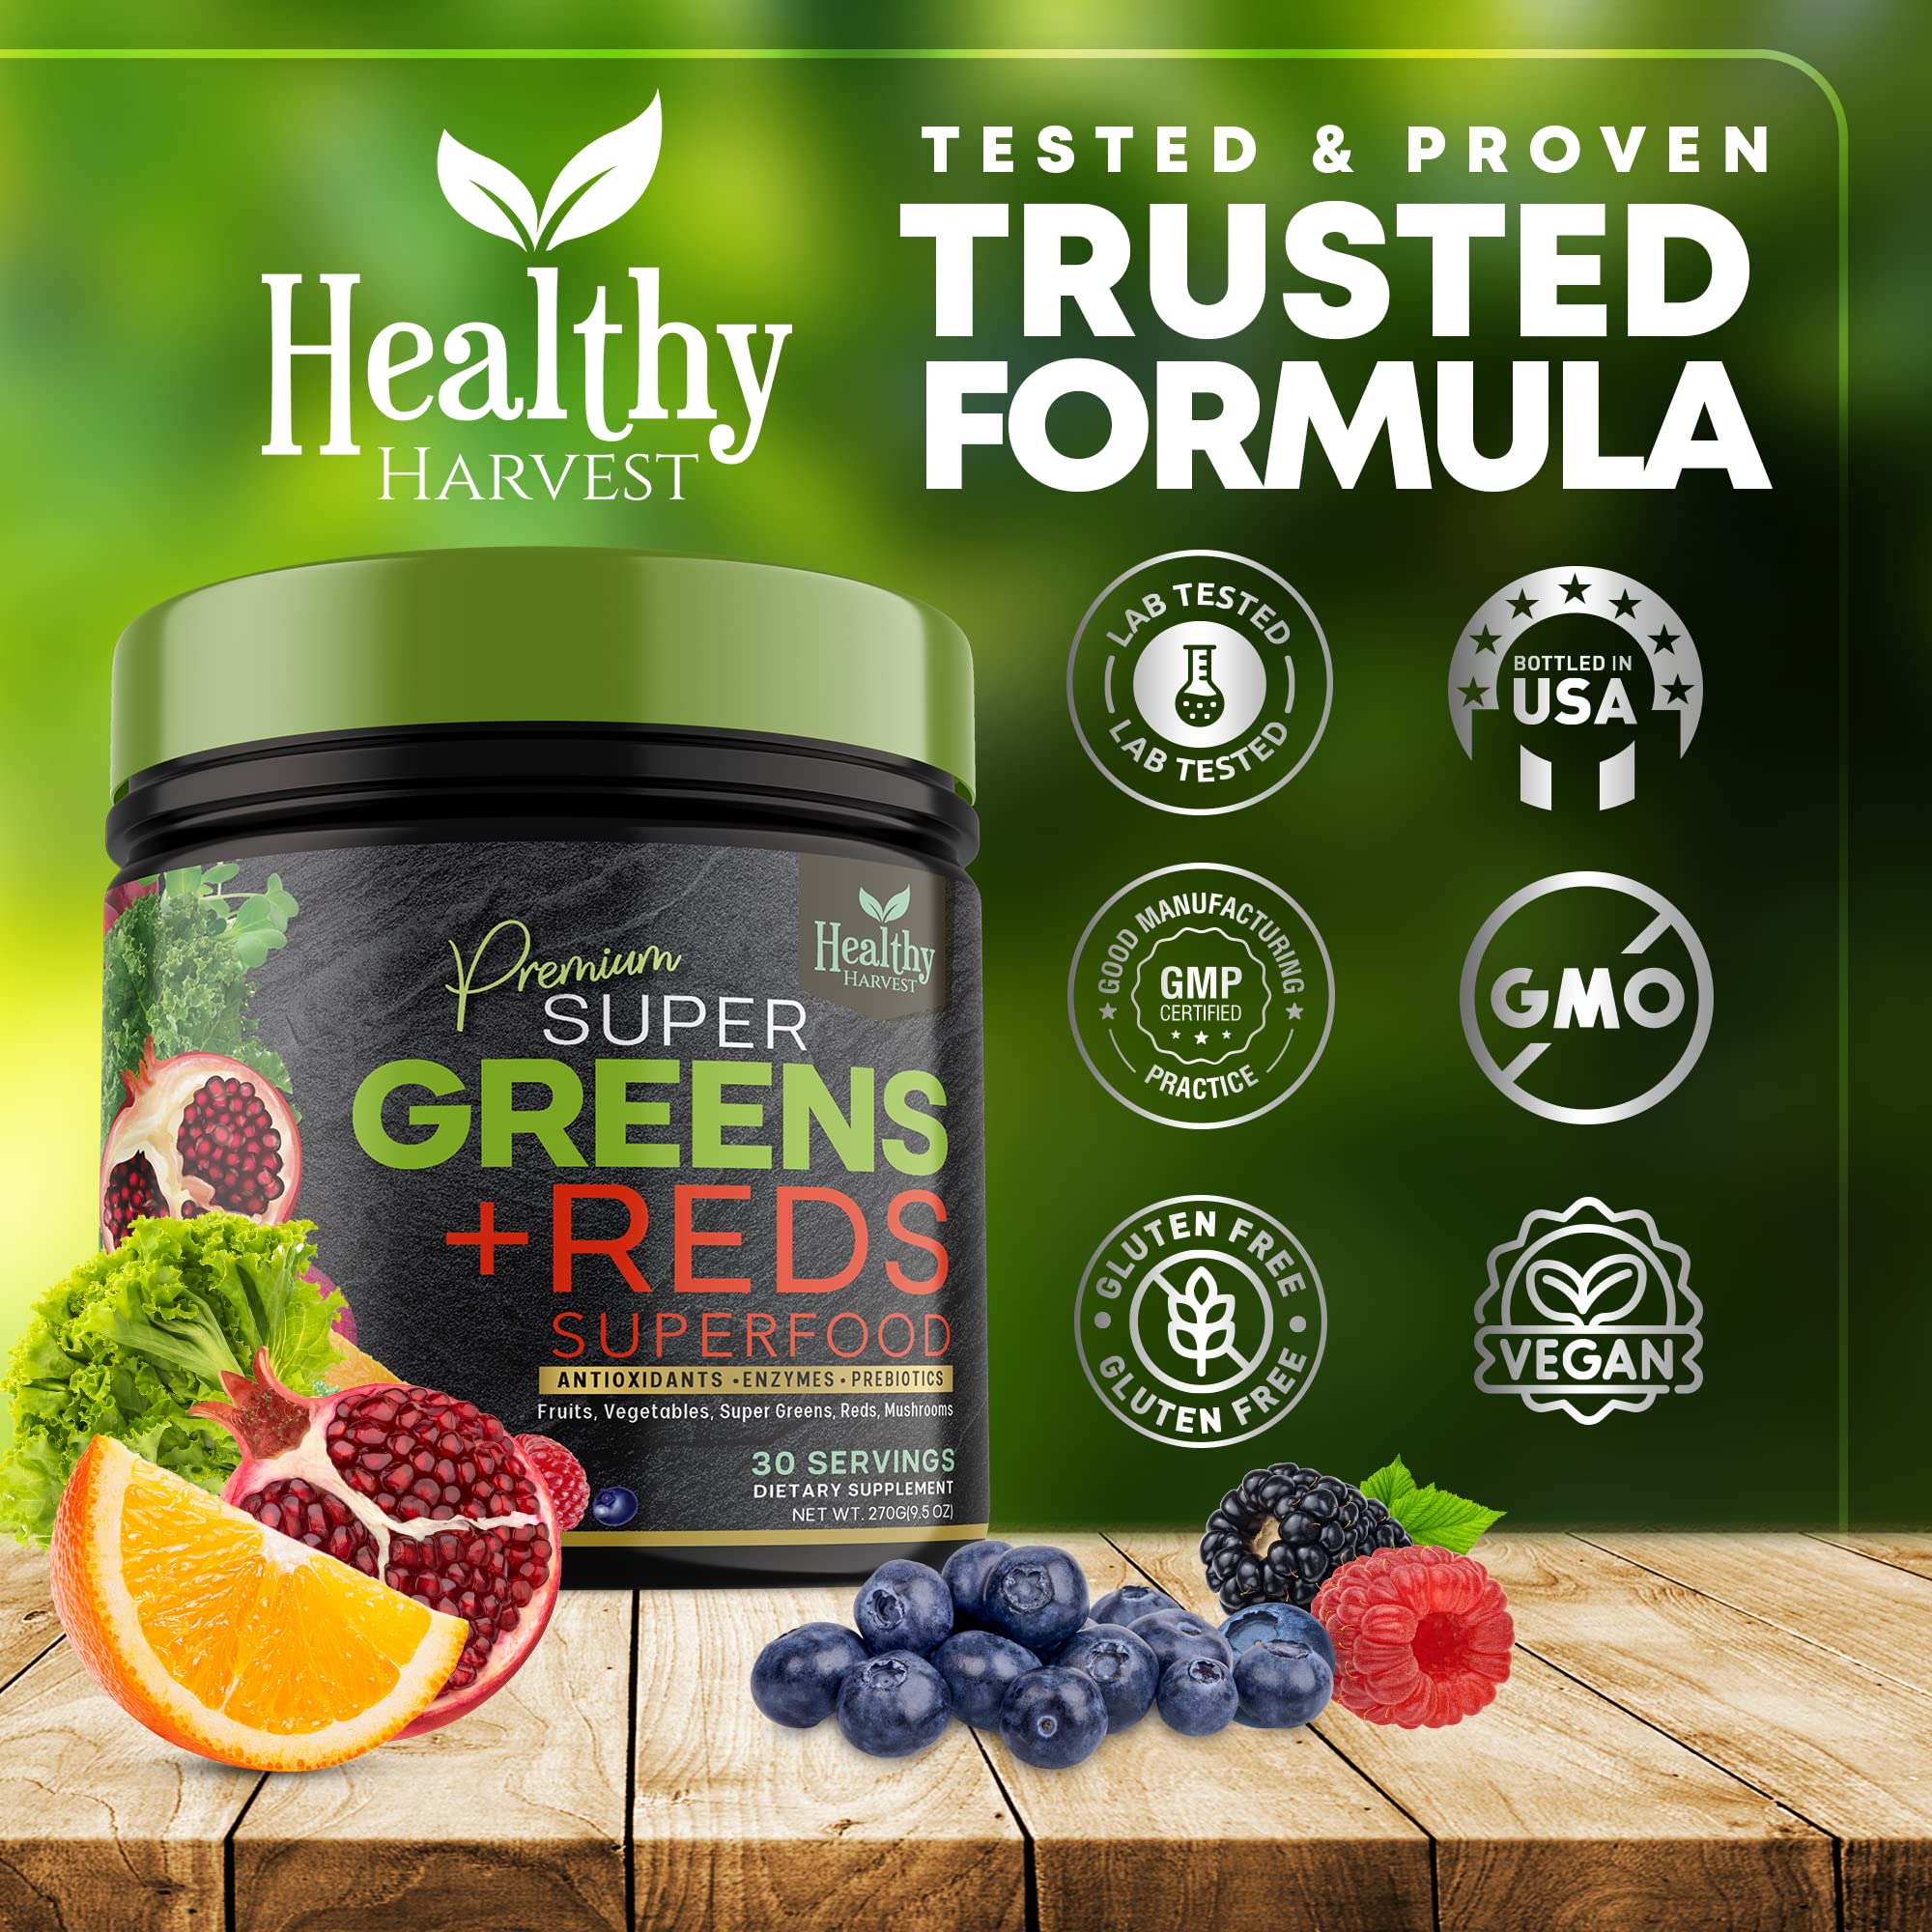 Greens Powder Superfood Supplement - Super Green Reds Smoothie Mix Blend with Spirulina, Wheat Grass, Chlorella, Beets, Digestive Enzymes, Natural Antioxidants - Vegan, Non-GMO - 30 Servings